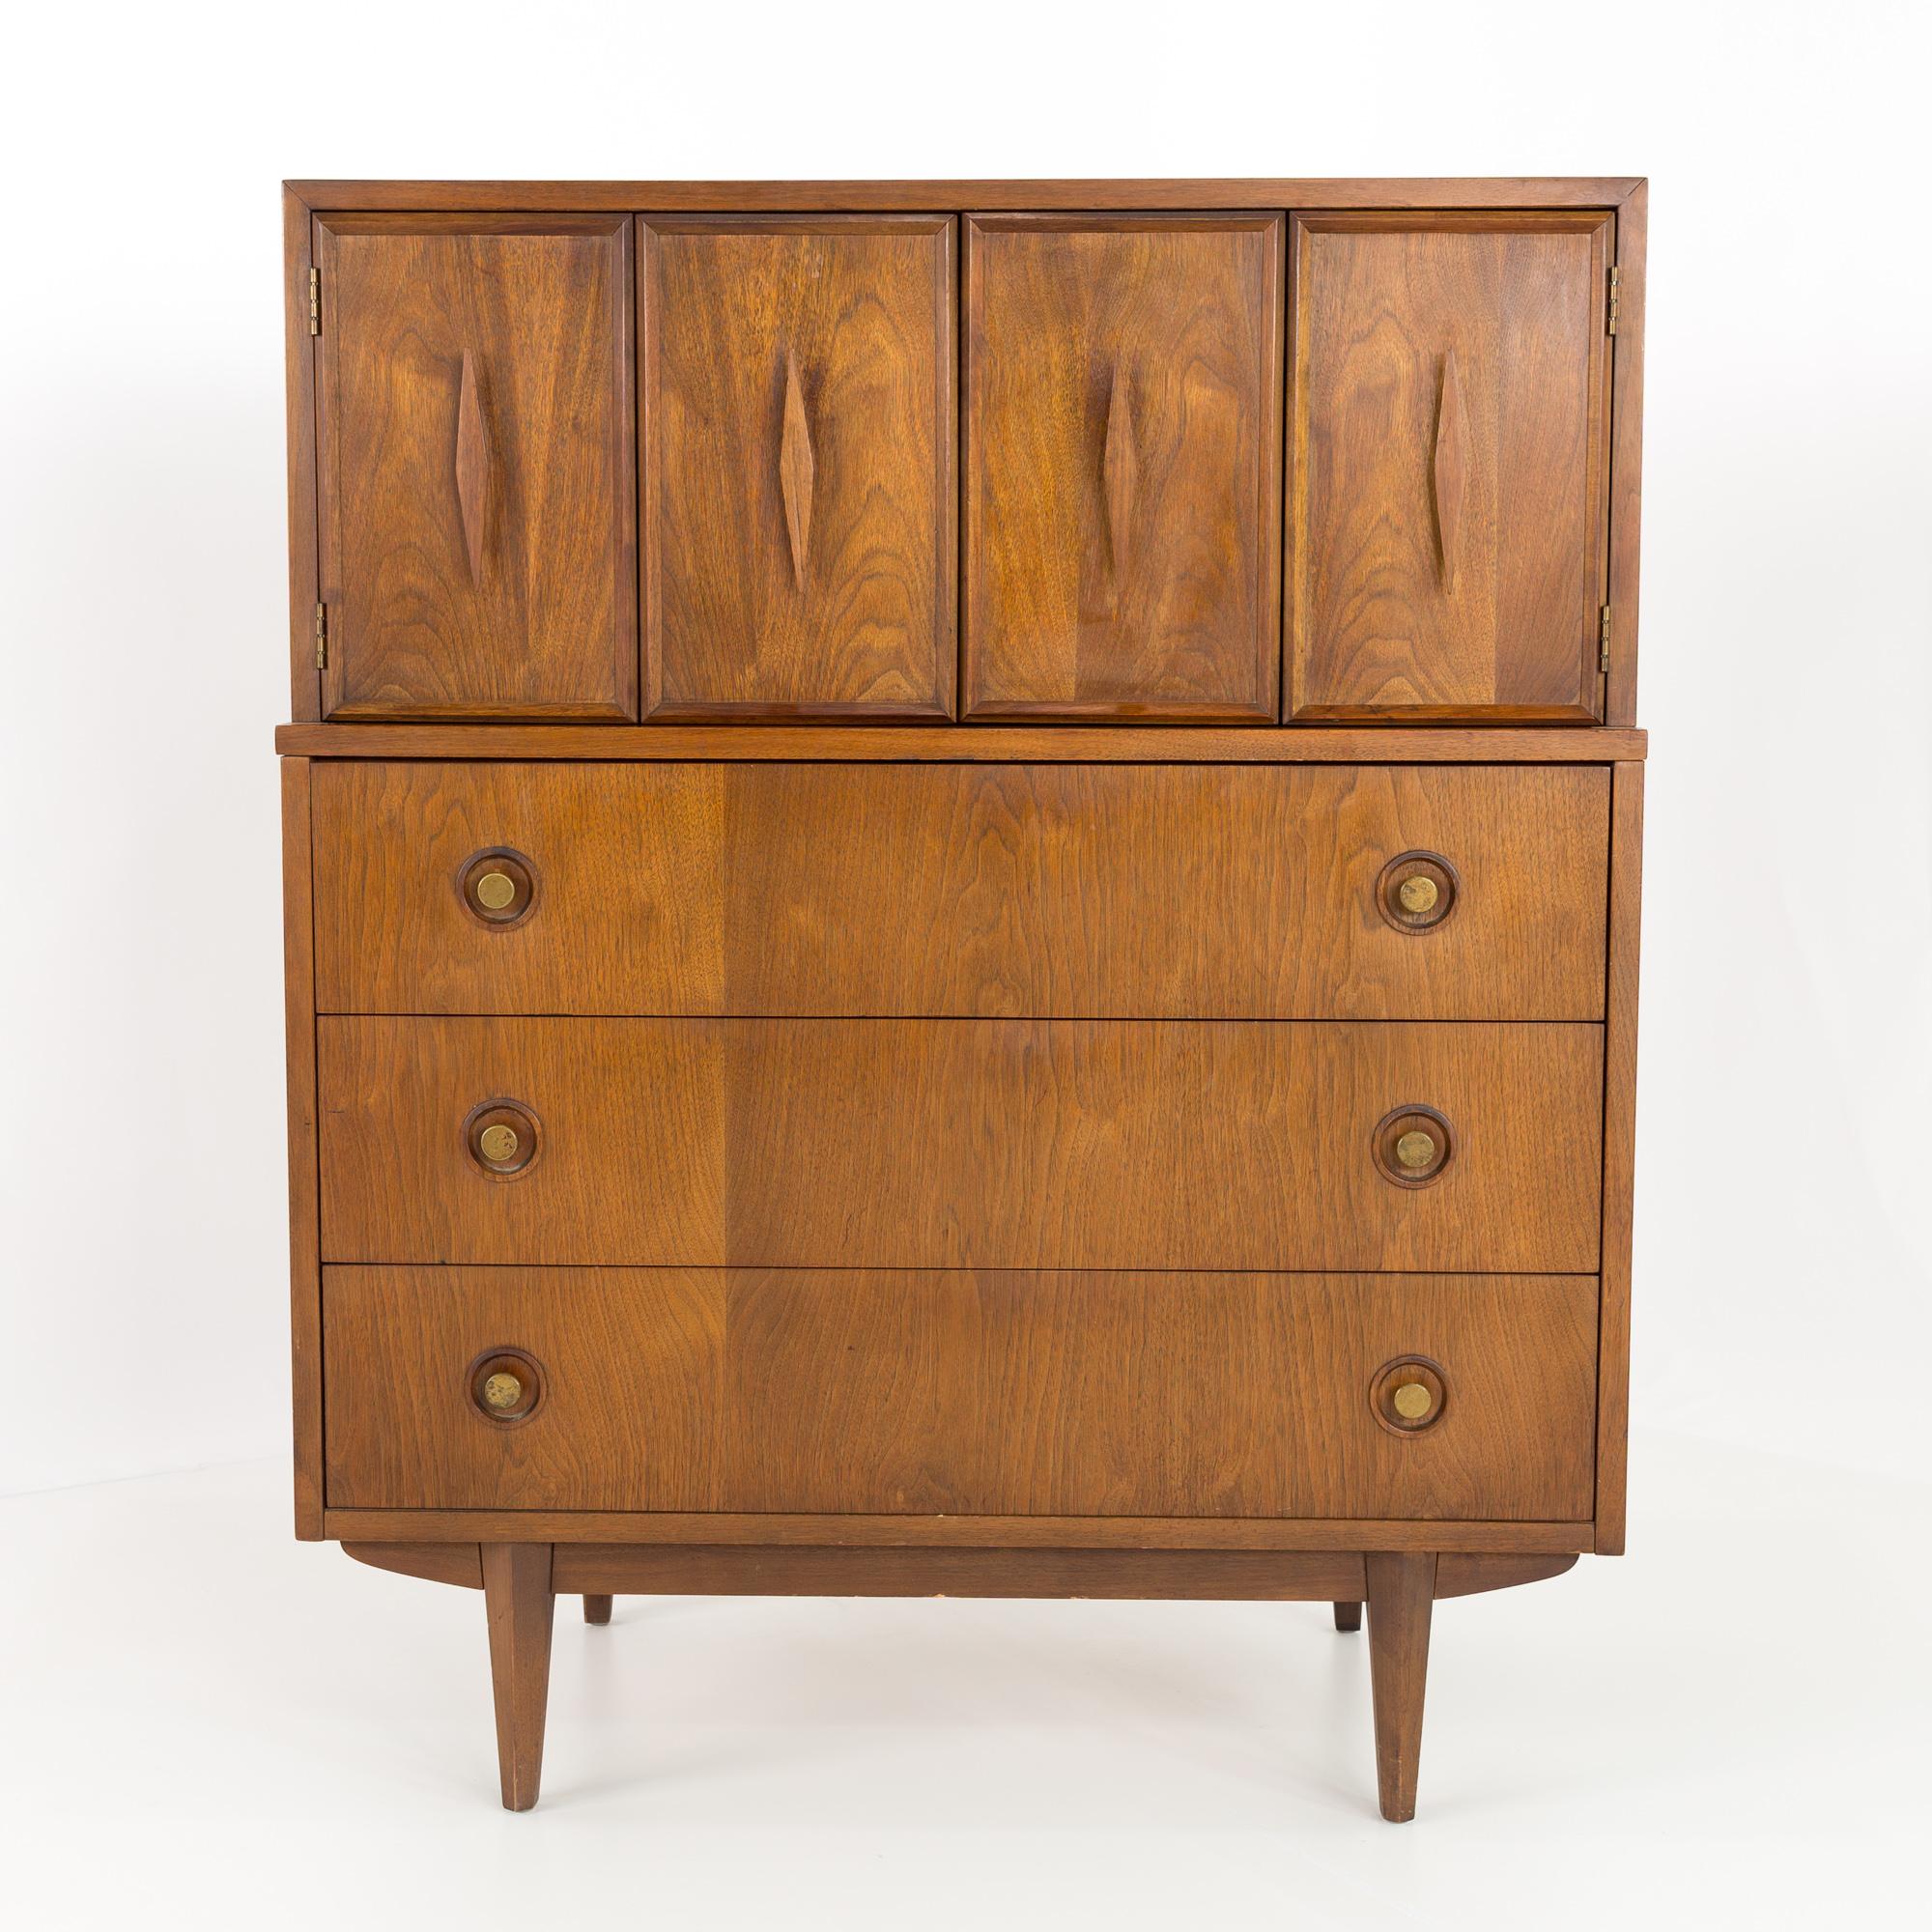 Albert Parvin for American of Martinsville mid century diamond highboy dresser

Dresser measures: 36 wide x 18.5 deep x 44.5 inches high

All pieces of furniture can be had in what we call restored vintage condition. That means the piece is